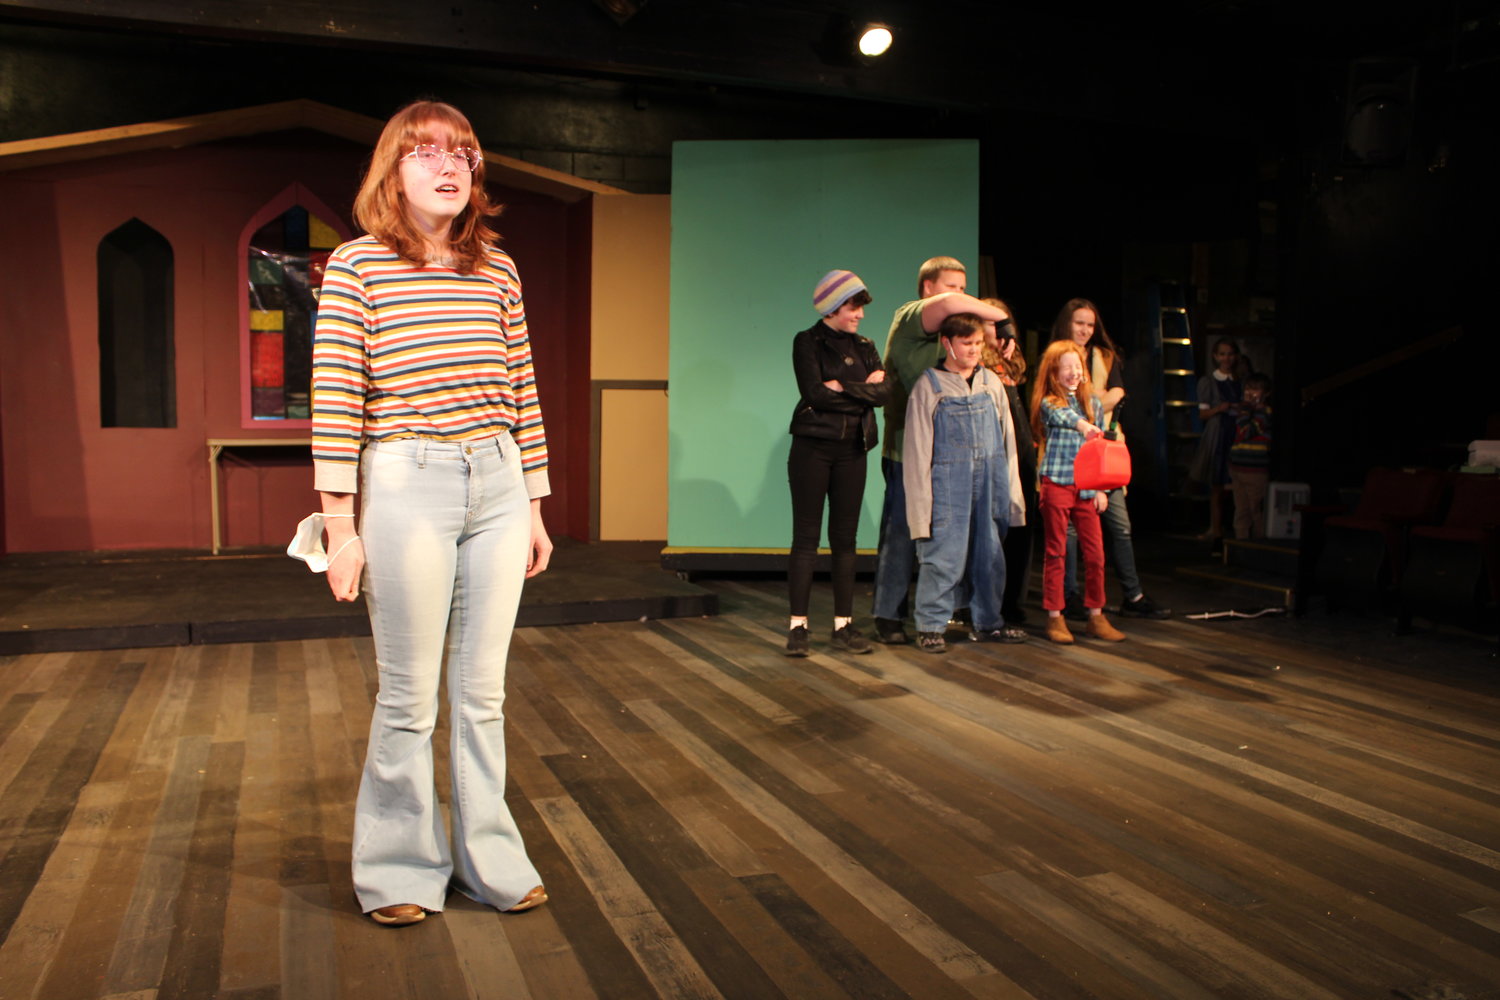 Beth Bradley (portrayed by Emily Cole) narrator of "The Best Christmas Pageant Ever" tells about the juvenile delinquent Herdman siblings: Ralph (portrayed by Sydney Keith); Imogen (portrayed by Anna Gunter); Leroy (portrayed by Nathaniel McKenzieSullivan); Claude (portrayed by Justin Hazlett); Ollie (portrayed by Leah Clark); and Gladys (portrayed by Hayden Bookter).